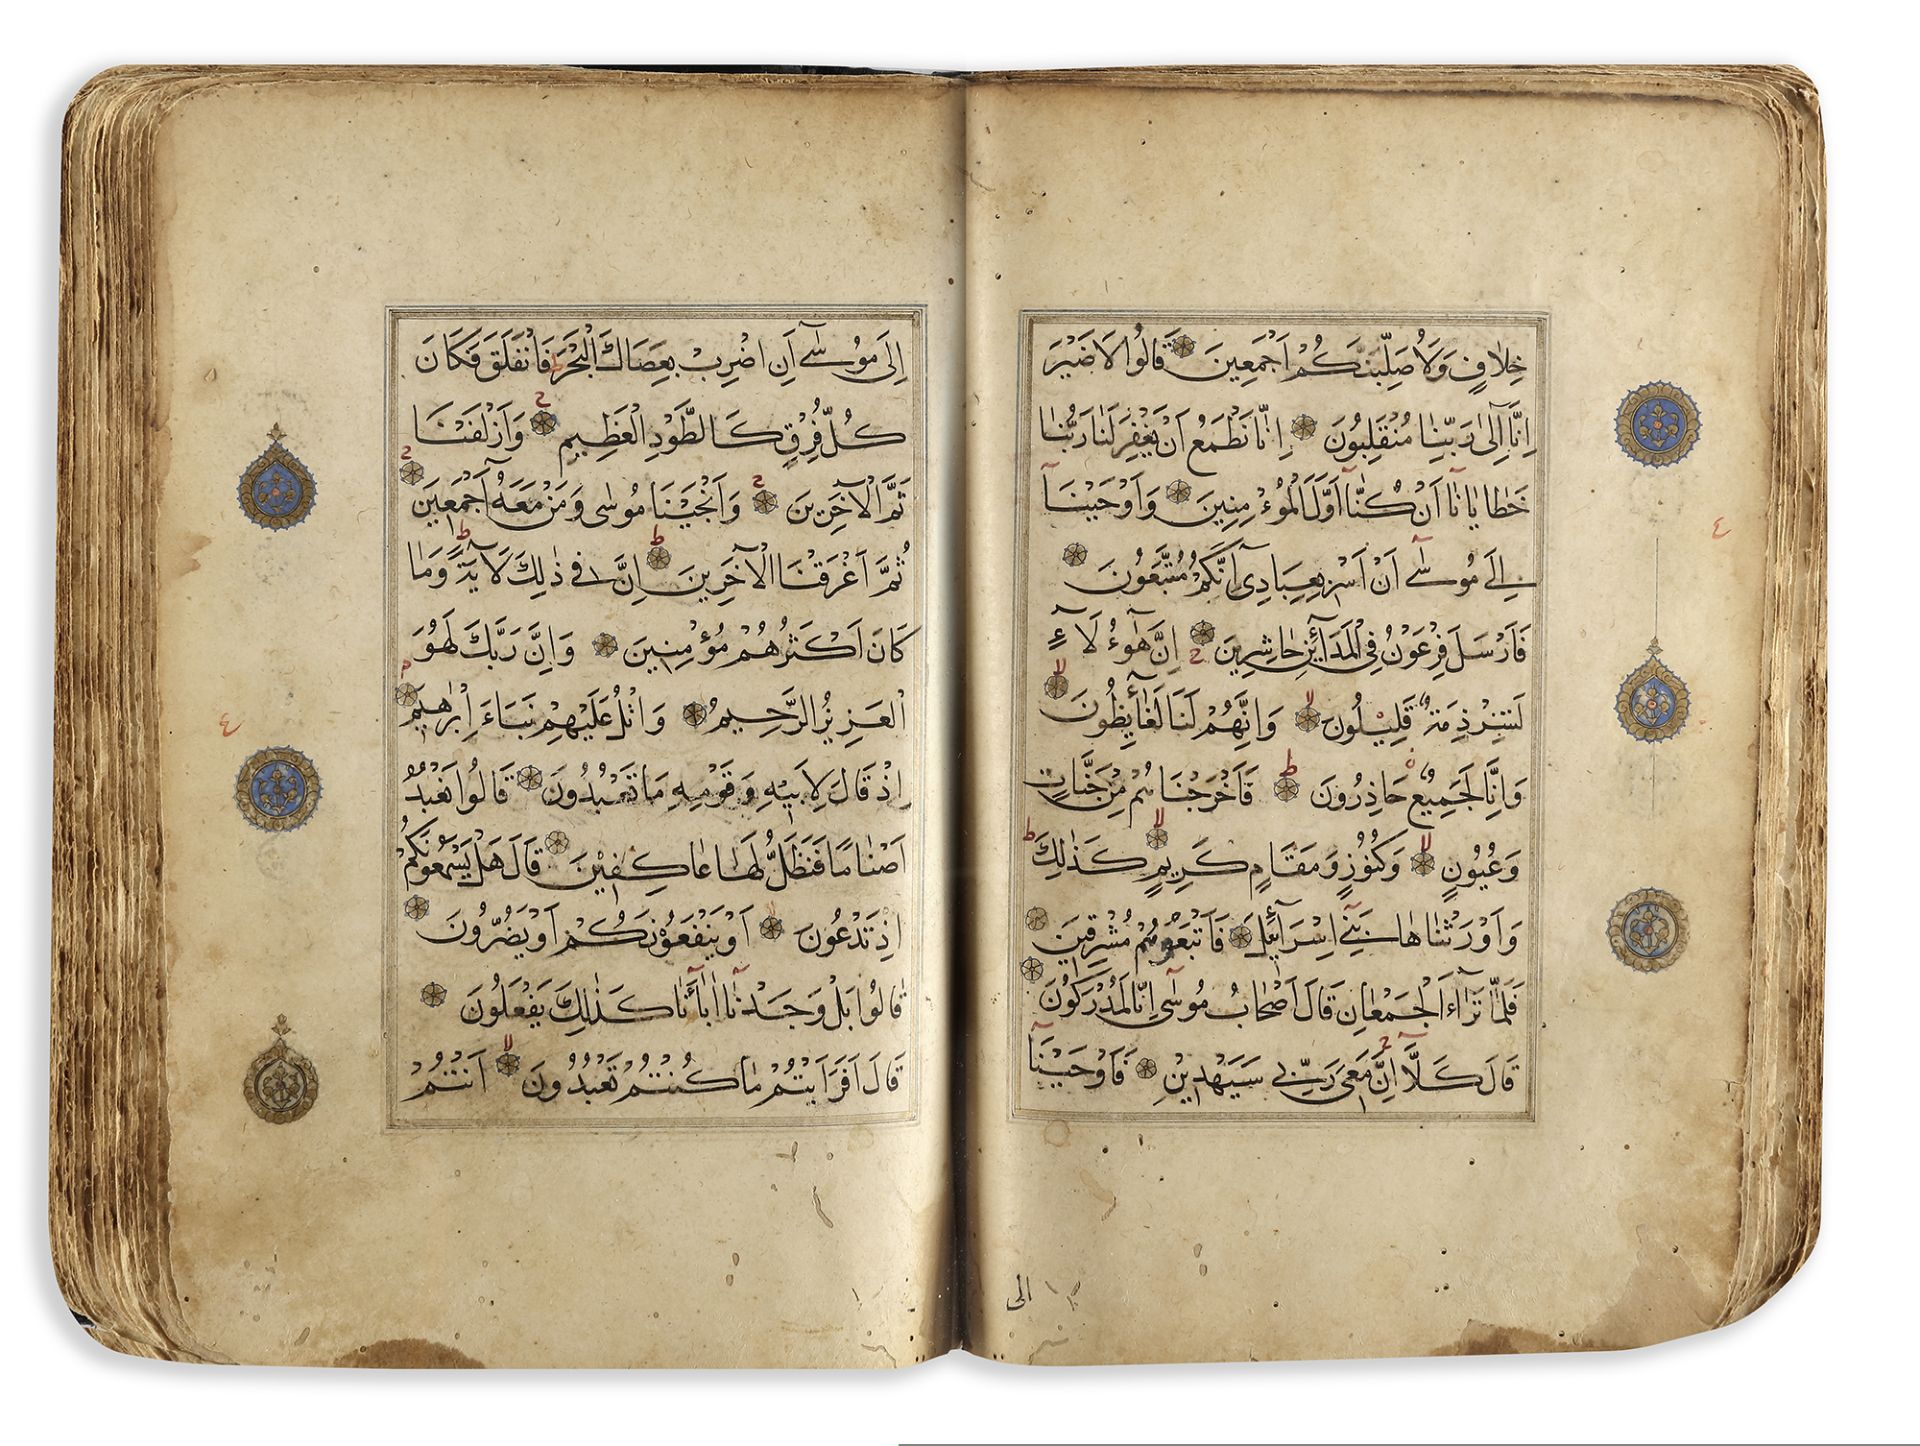 A TIMURID QURAN, DATED 743 AH/1343 AD - Image 2 of 4